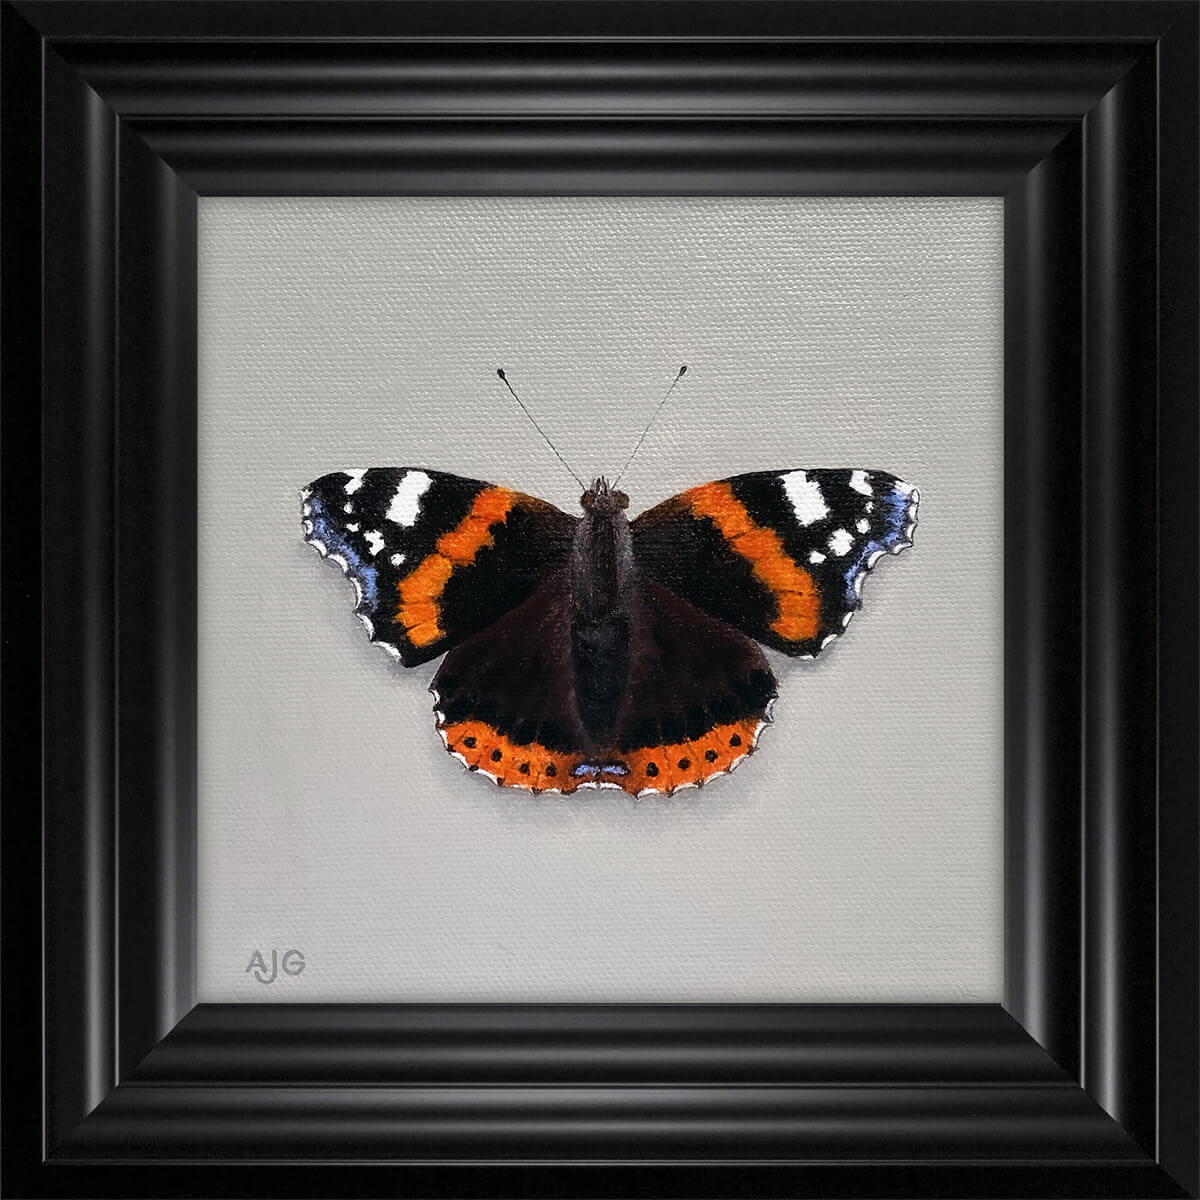 Original framed painting of a red admiral butterfly by Amanda Gosse AJG Artist